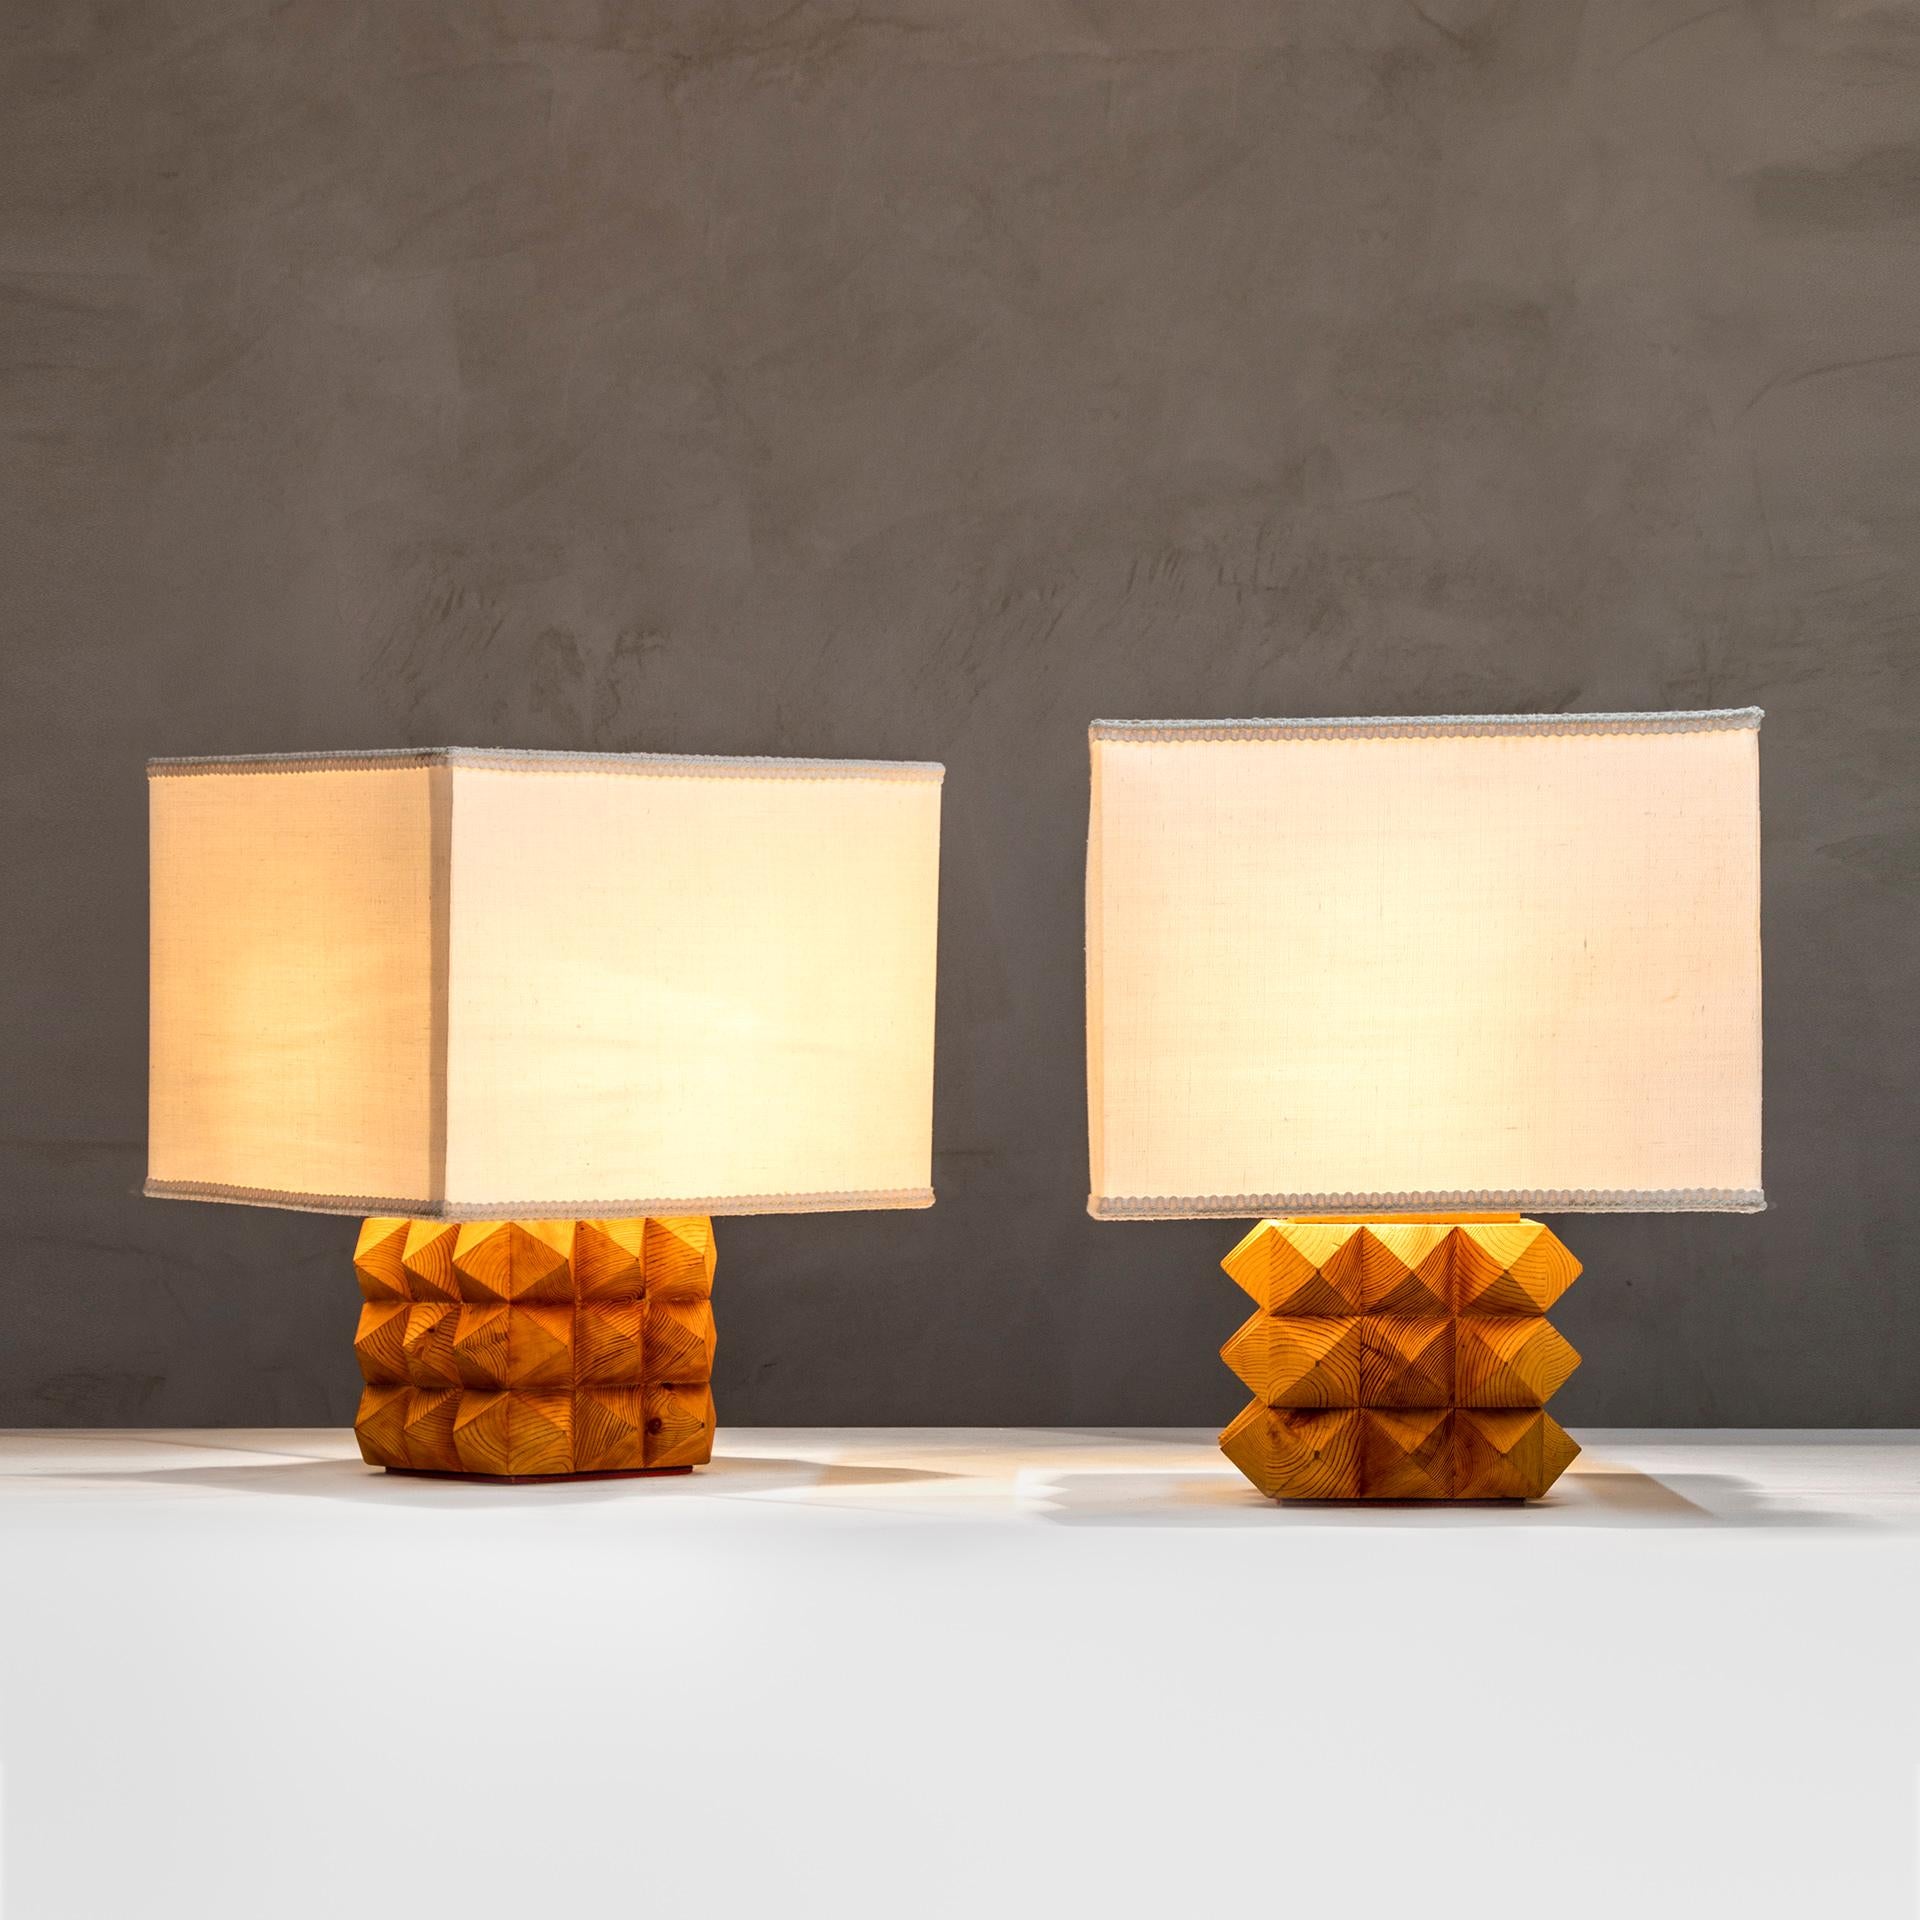 Pair of table lamps by Mario Ceroli for EAD (Edizioni Arte Design) deisgned in '80s, with base in wood and diffuser in fabric. The model is called 